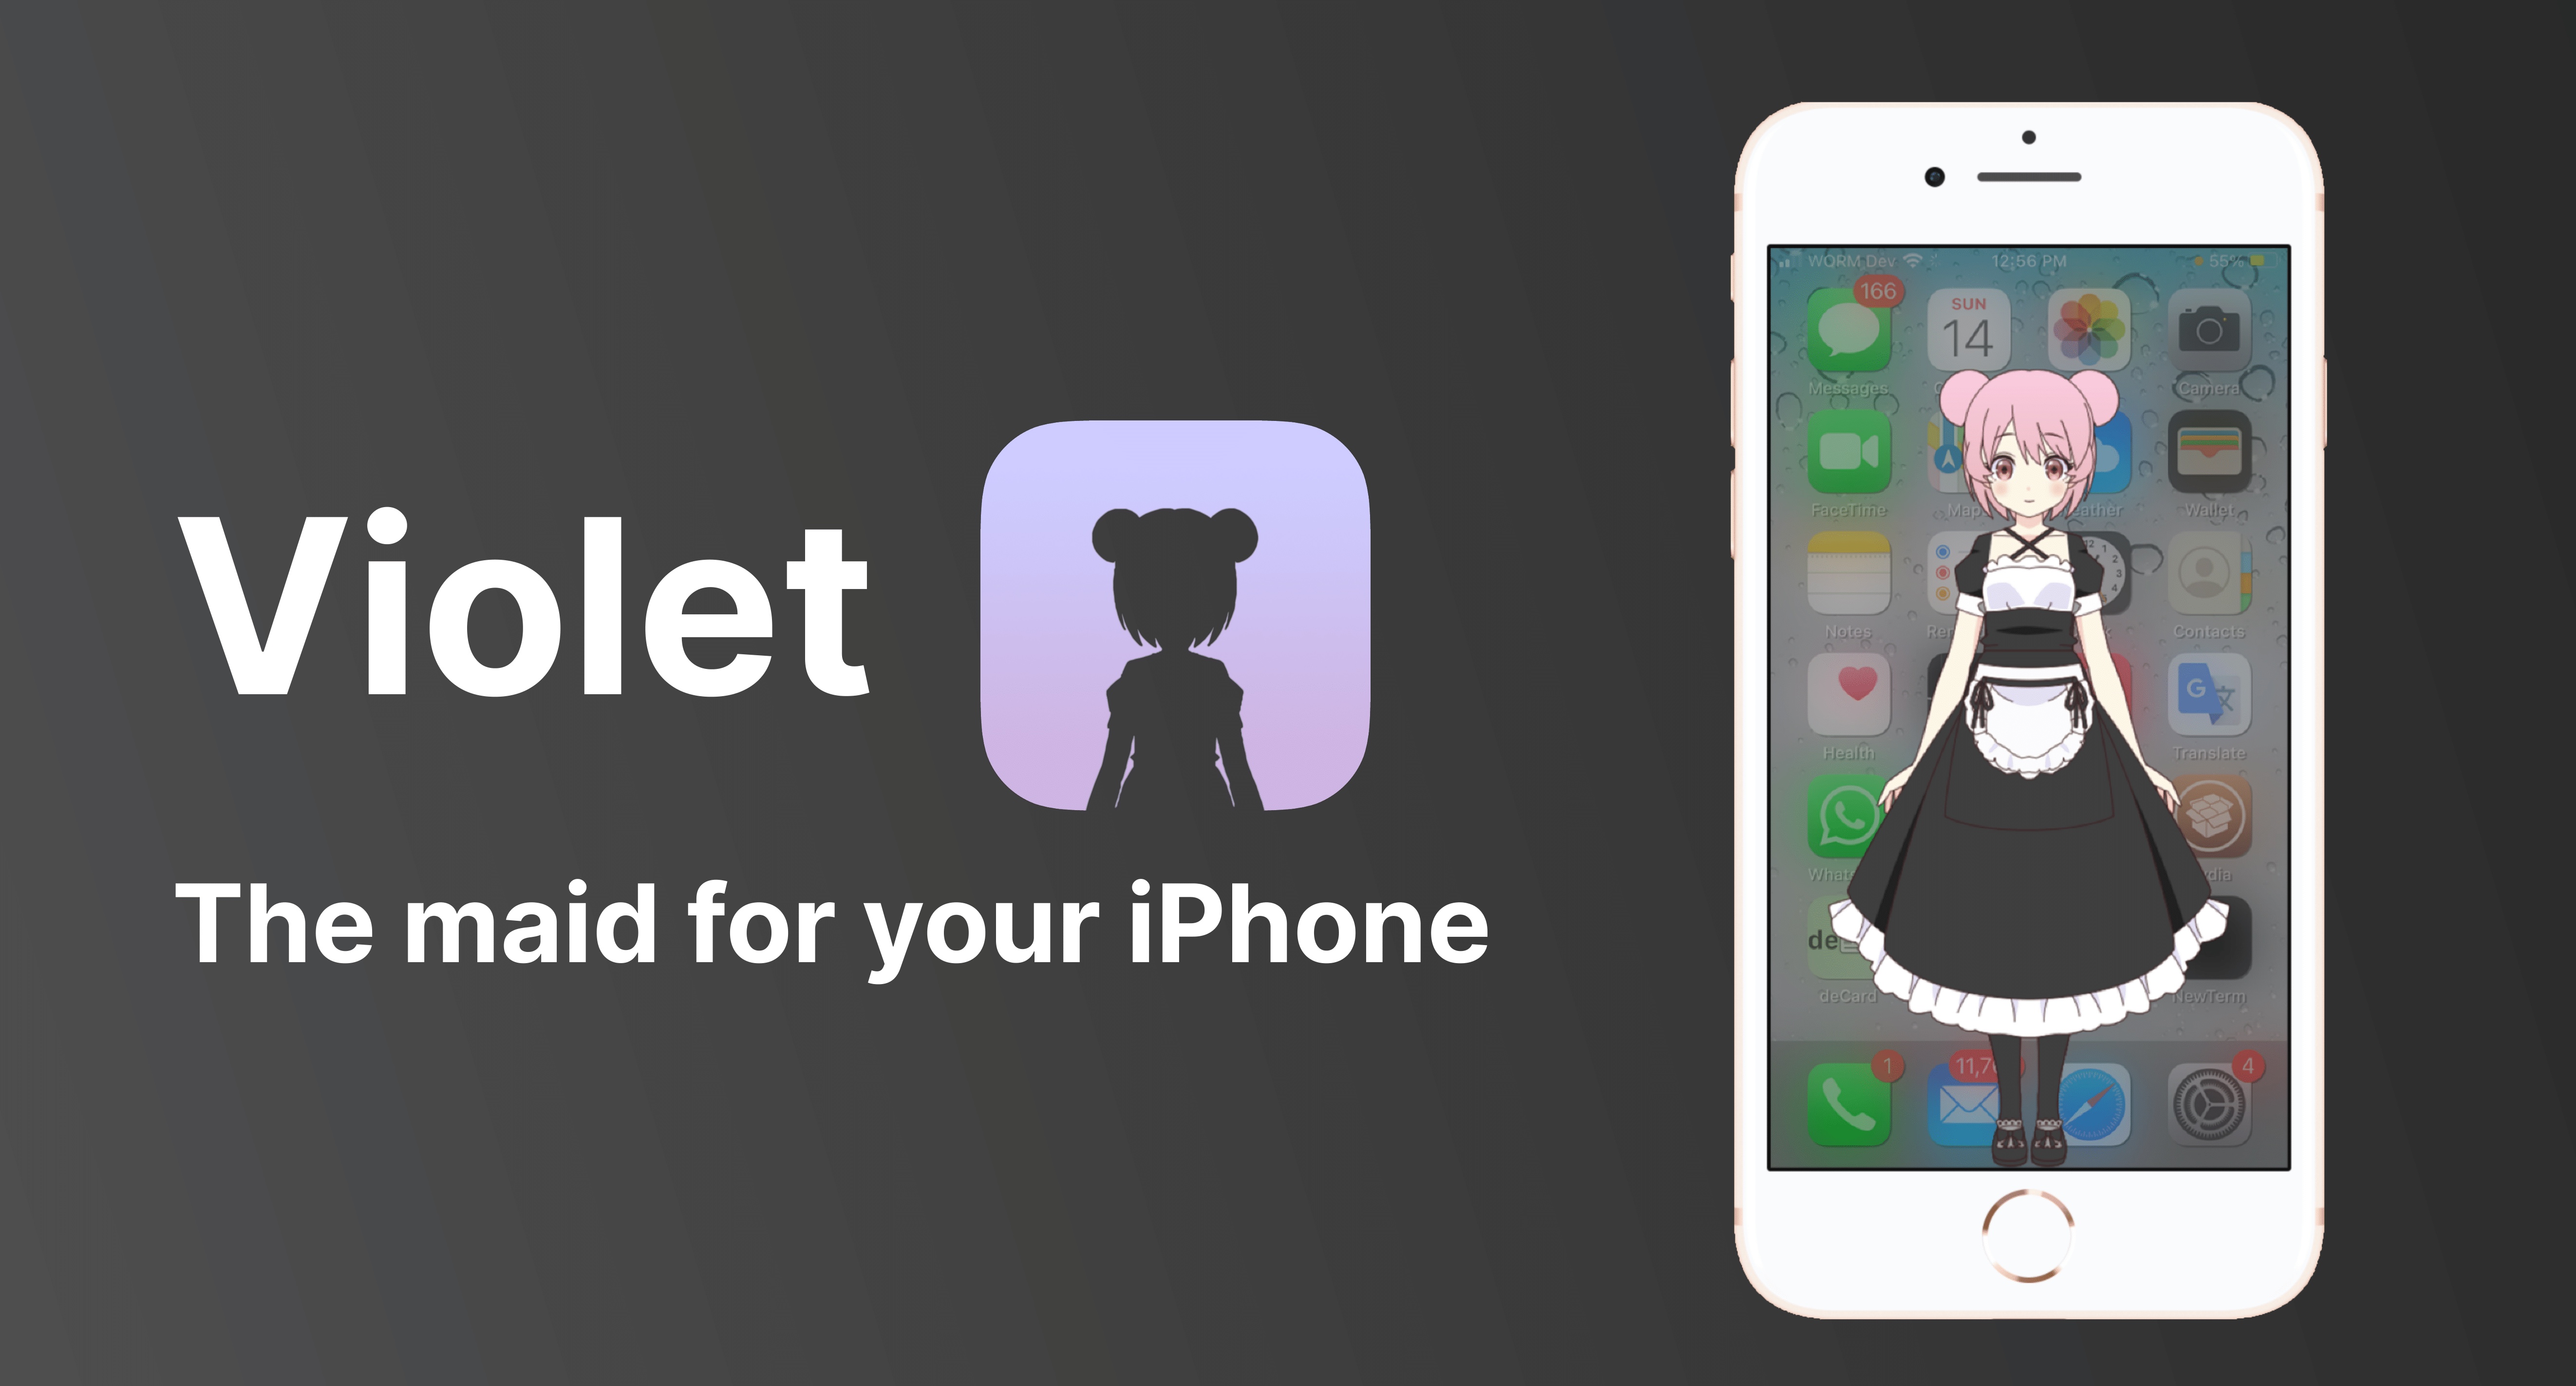 Violet the maid for your iPhone.